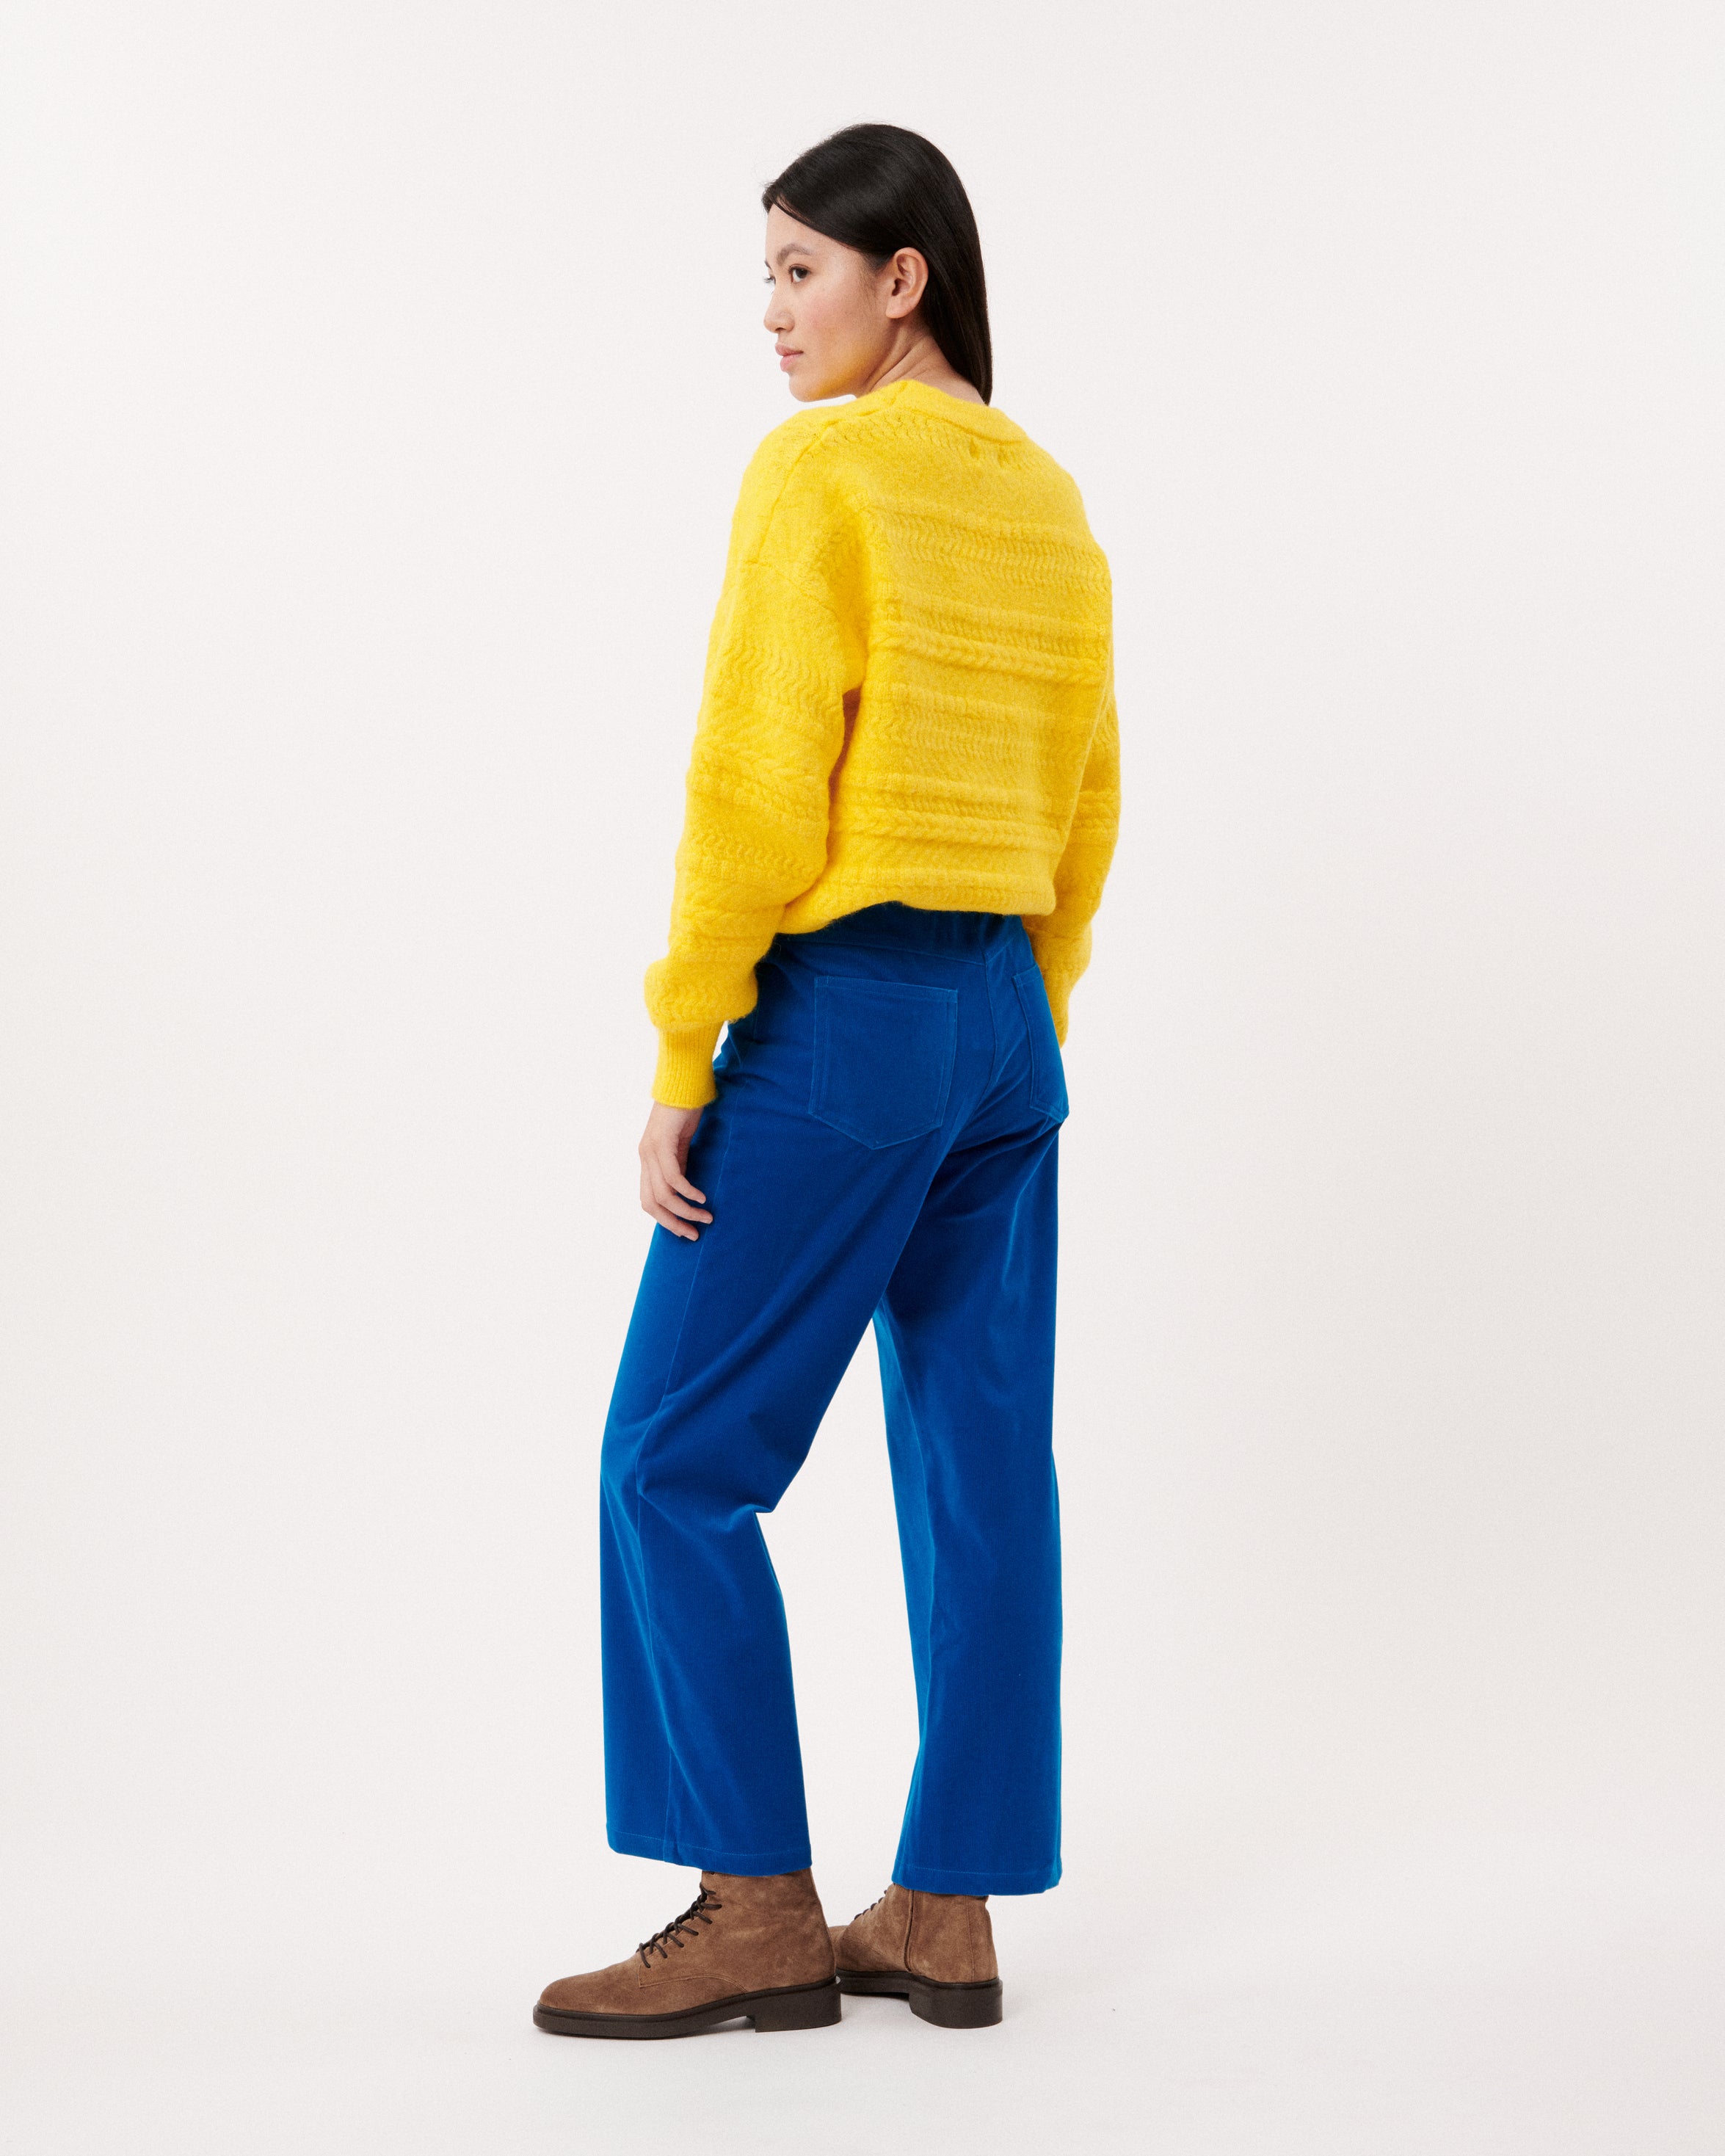 Yellow Knit | Frnch